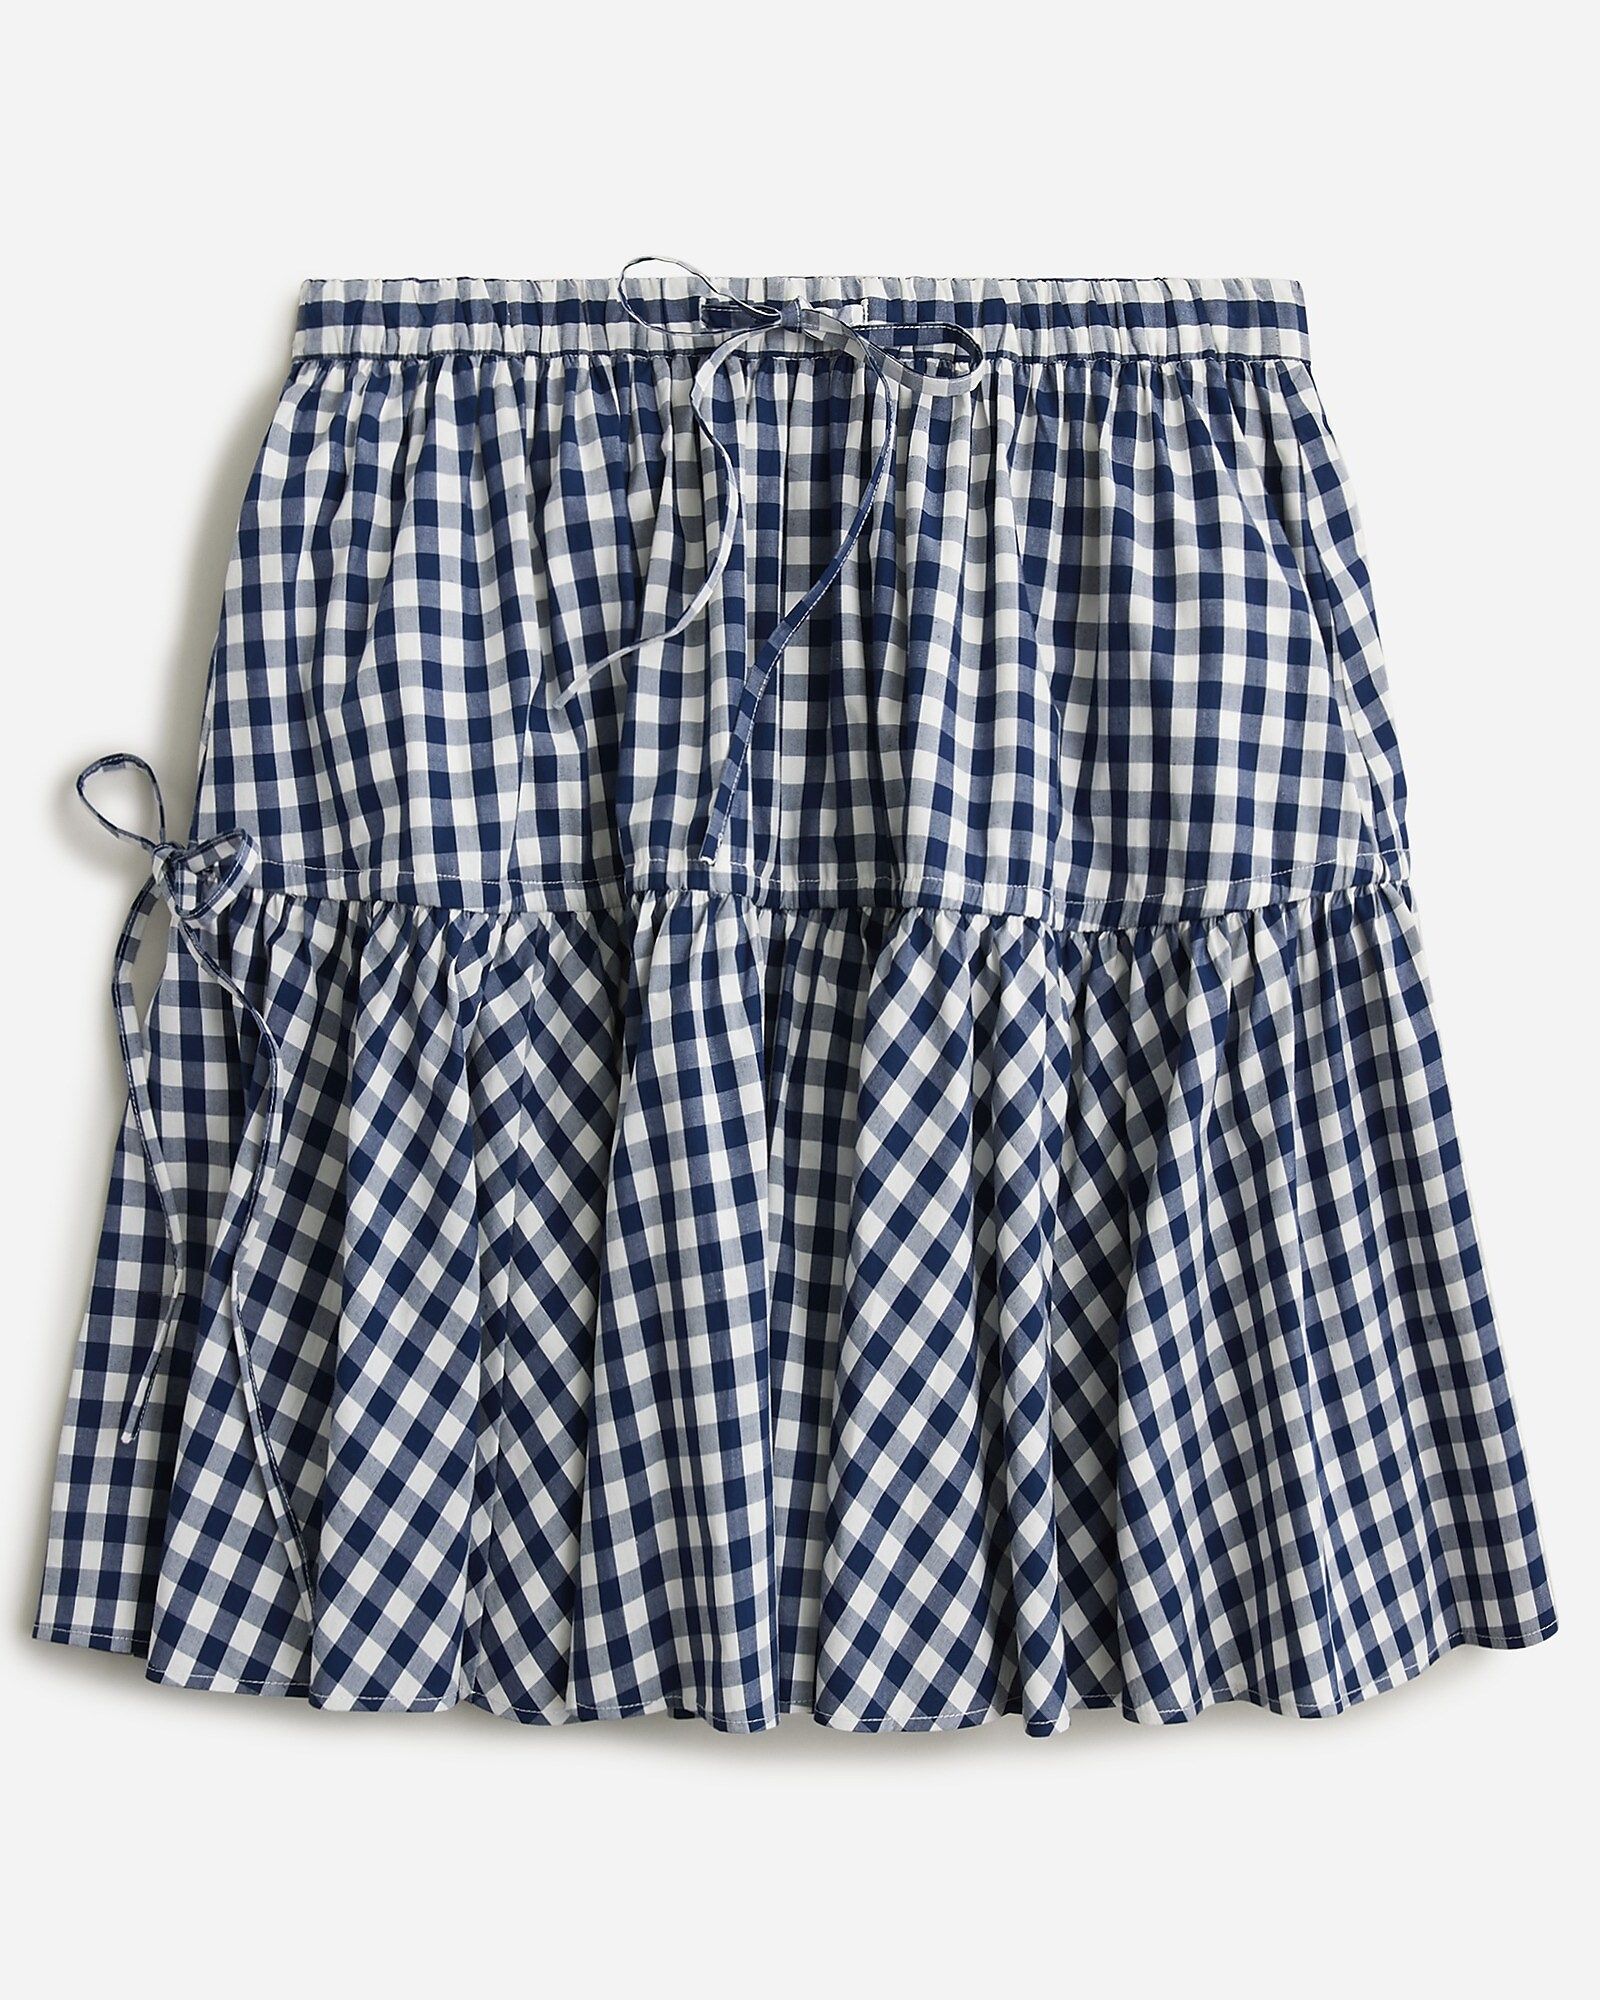 Tiered mini skirt in navy gingham | J.Crew US